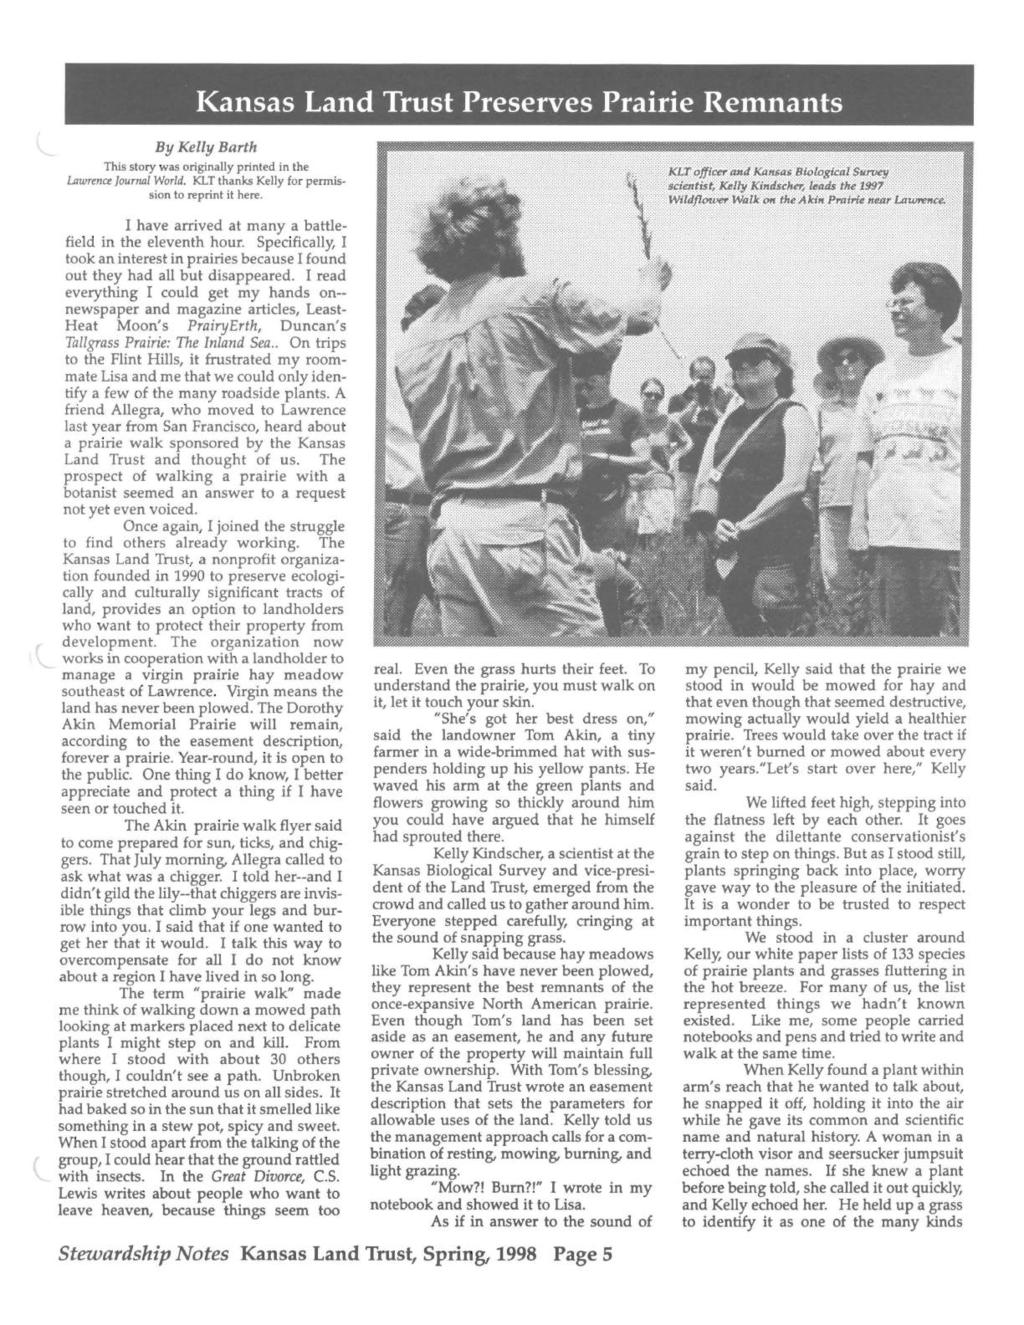 Kansas Land Trust Preserves Prairie Remnants By Kelly Barth This story was originally printed in the lawrence Journal World. KLT thanks Kelly for permission to reprint it here.